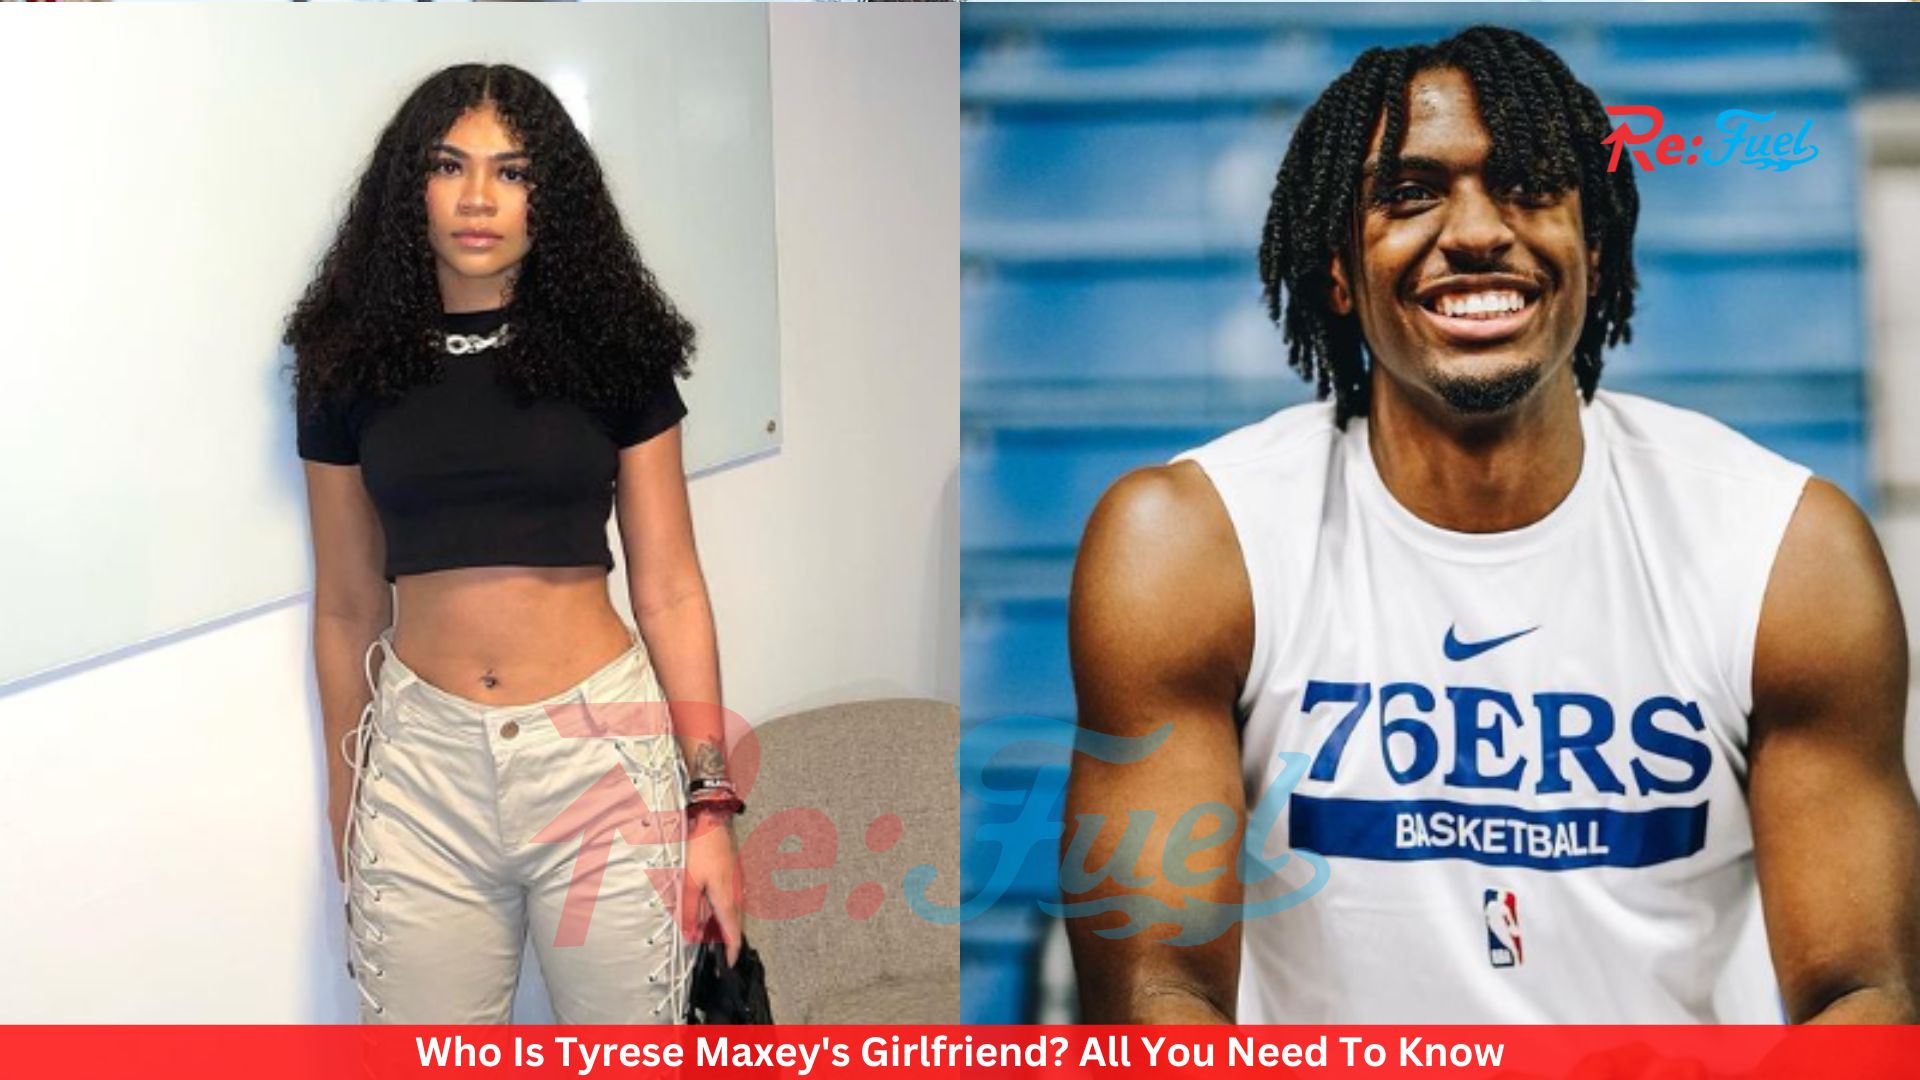 Who Is Tyrese Maxey's Girlfriend? All You Need To Know